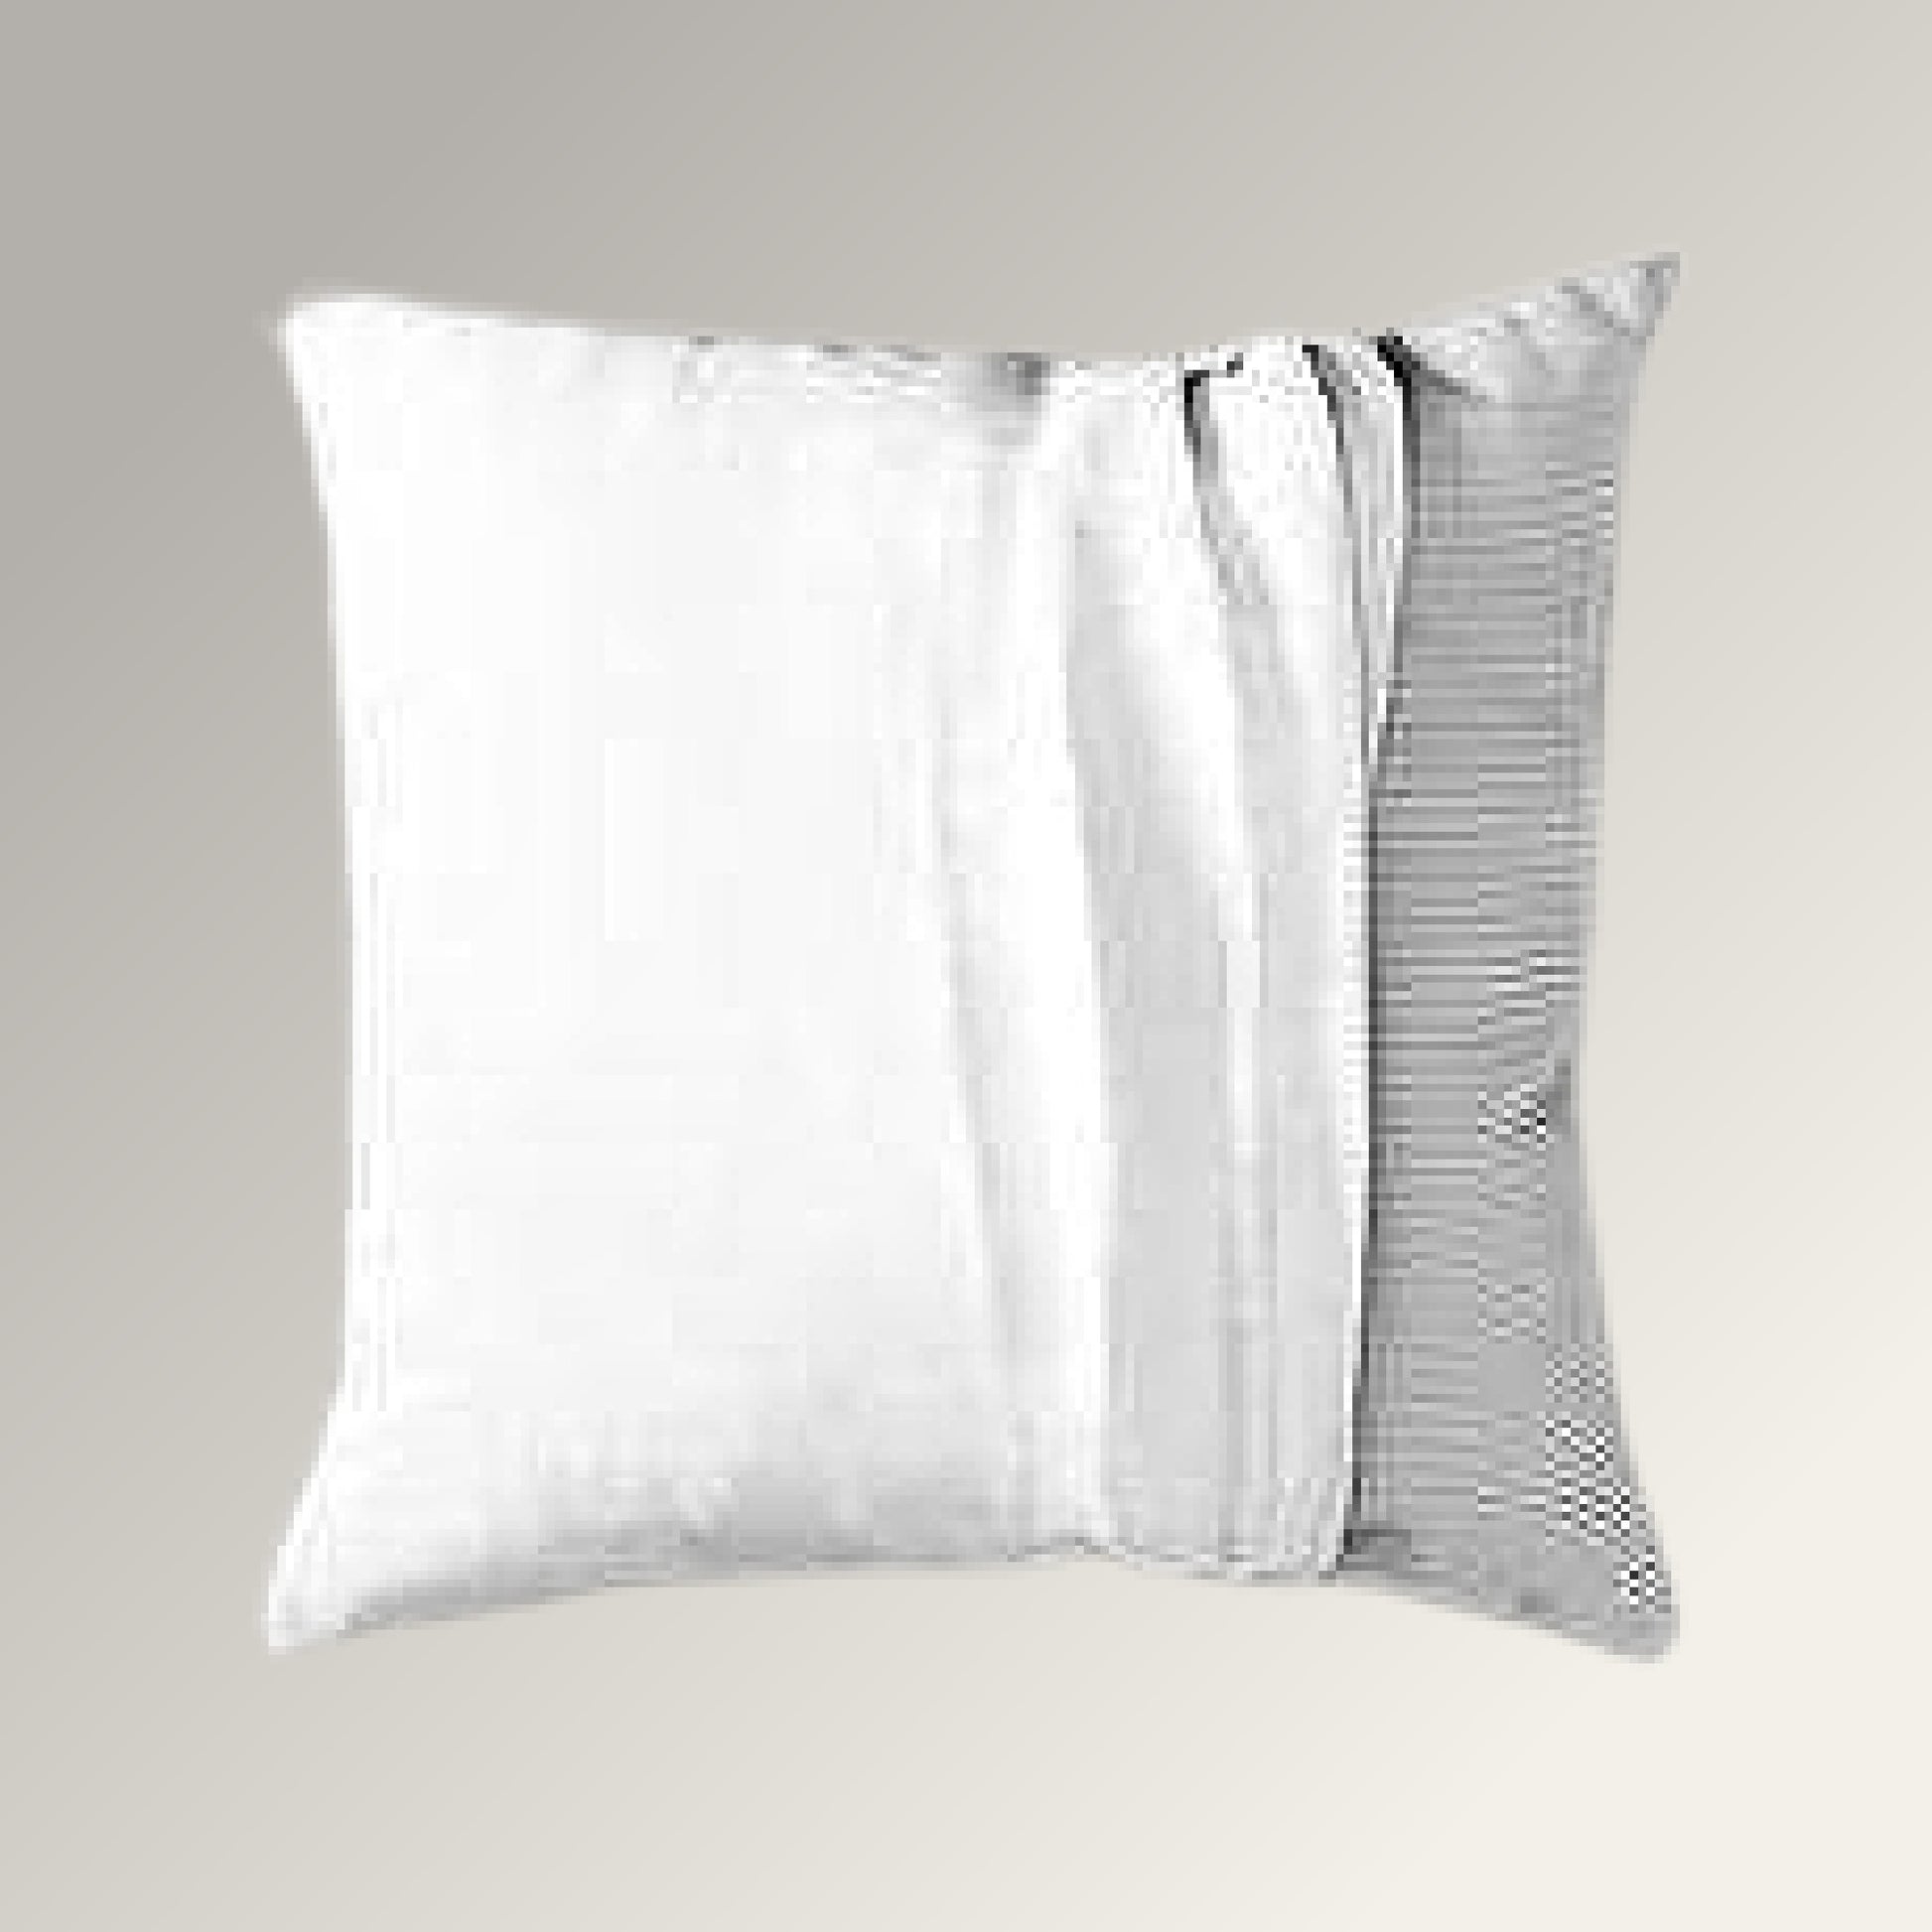 Example of how to use a pillow case on an existing square pillow